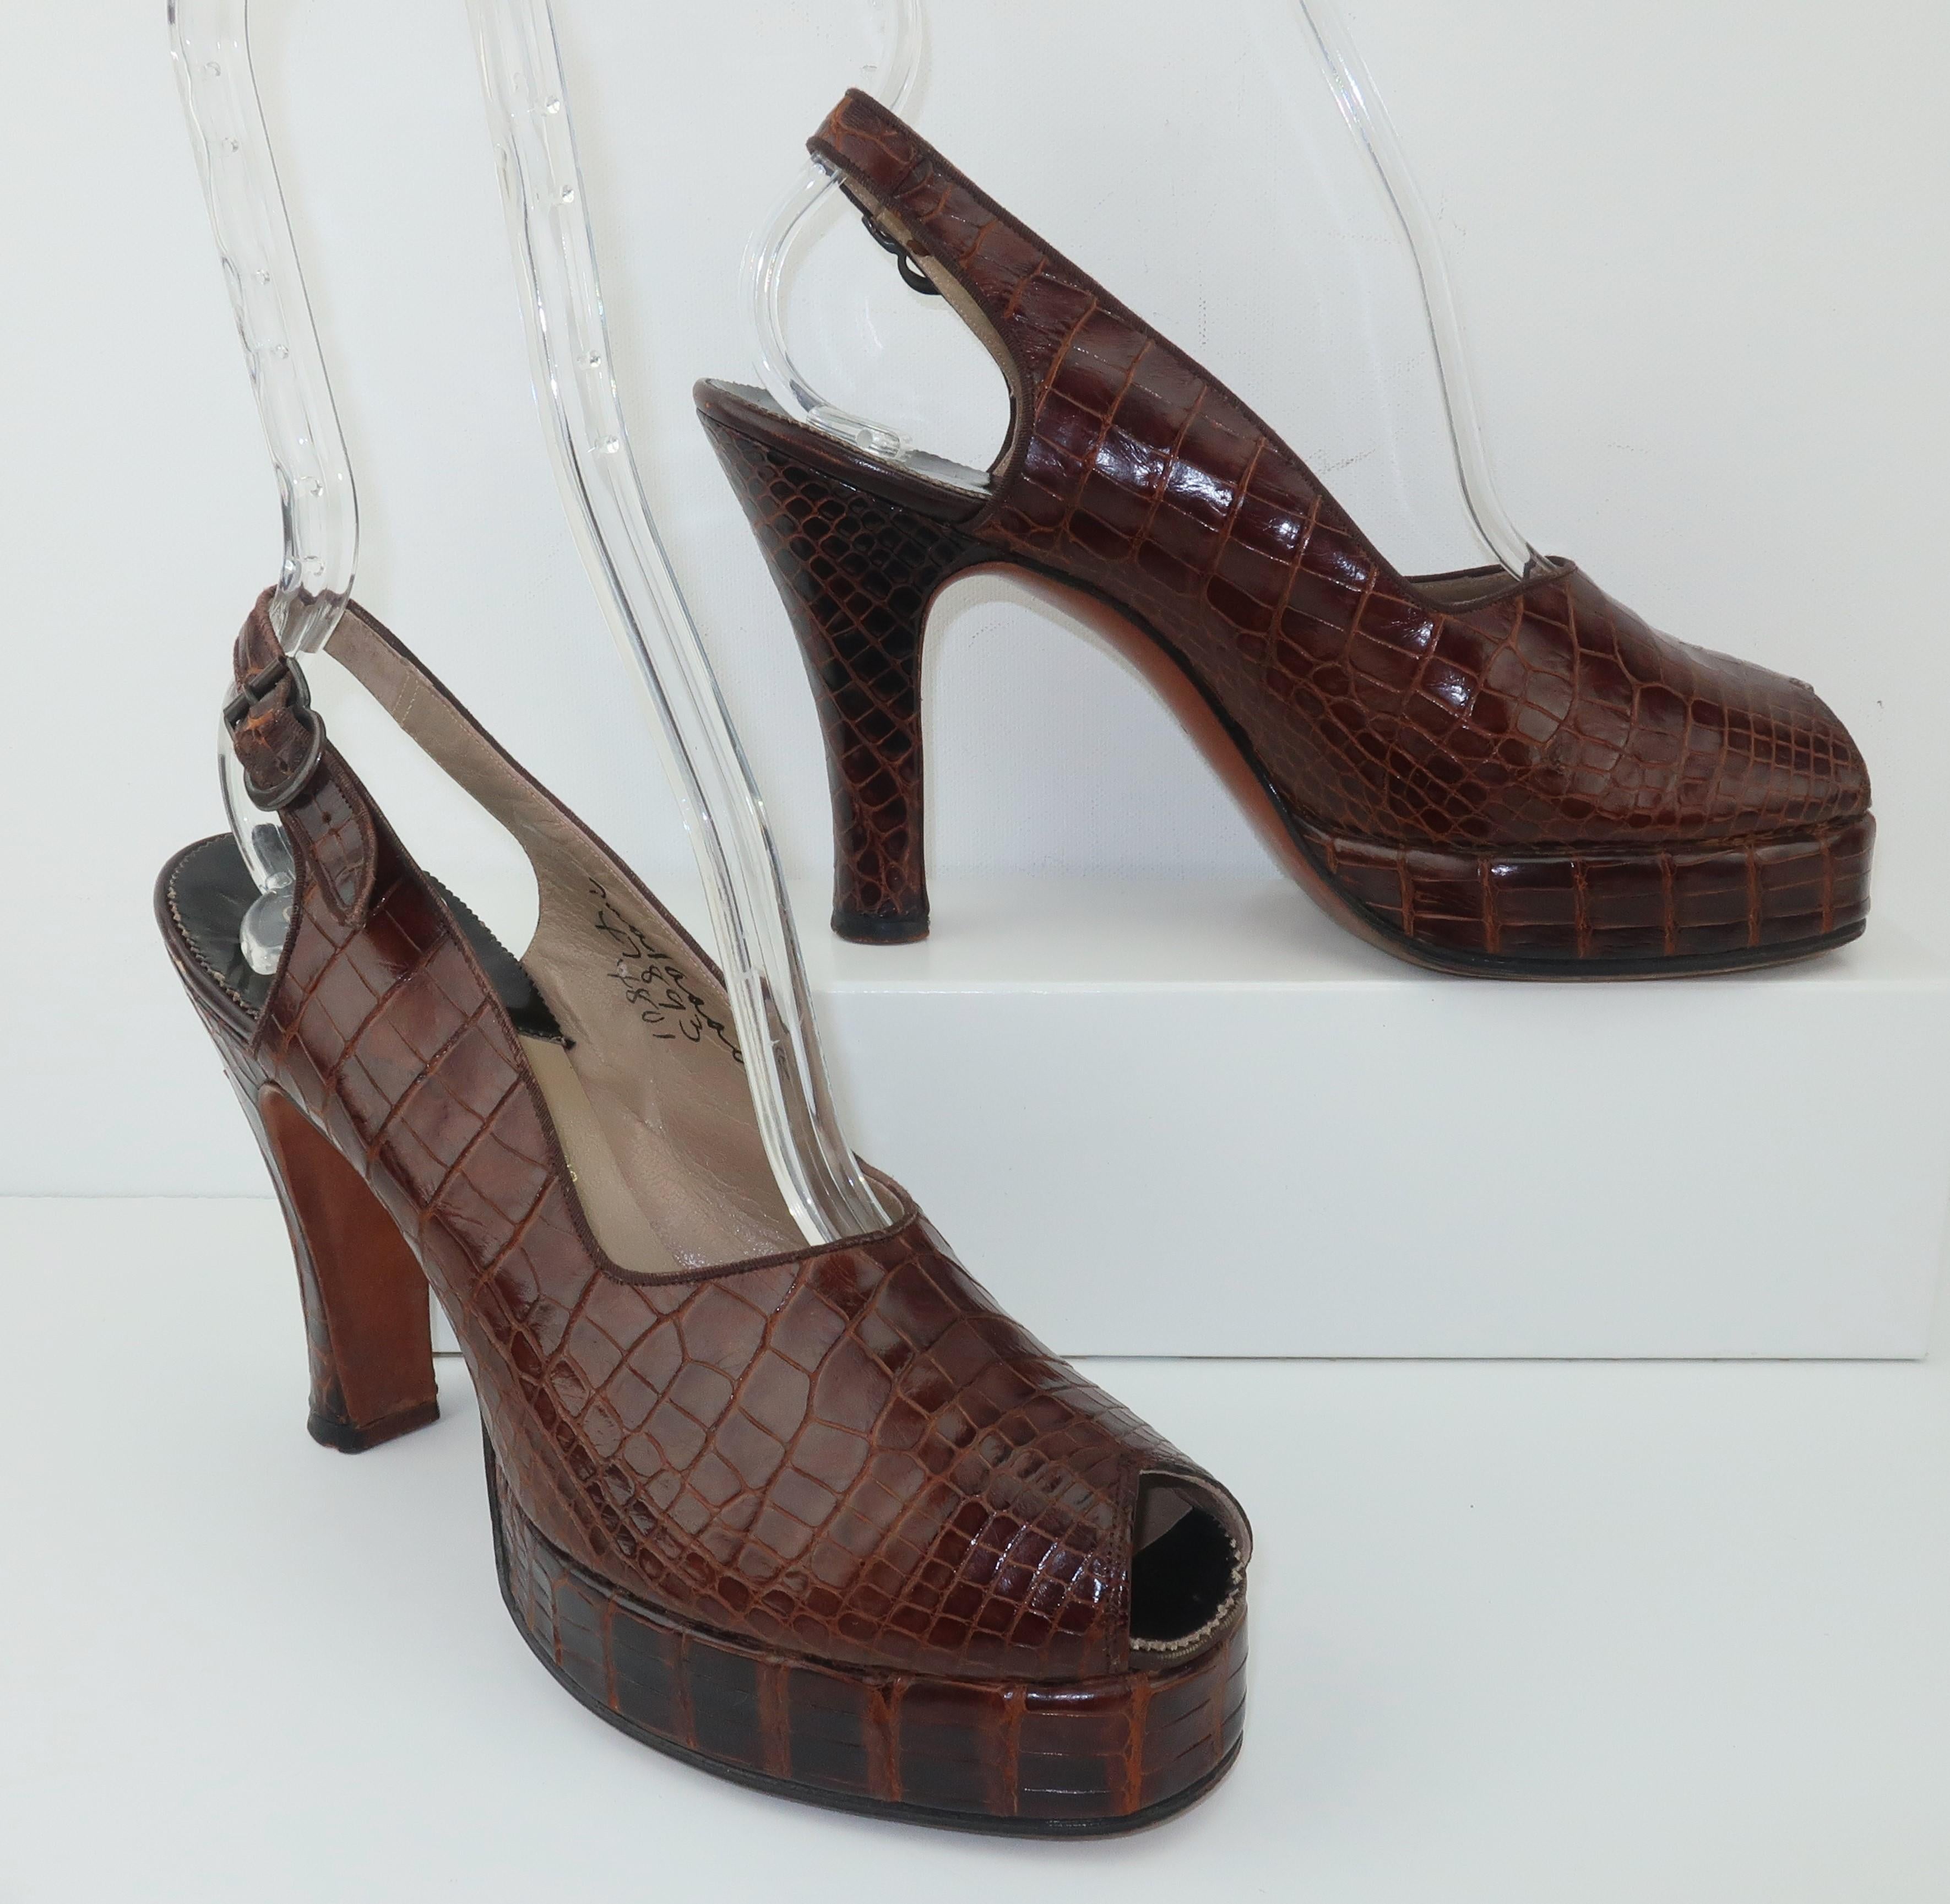 Someone time traveled from the 1970's to the 1940's or vice versa. One thing is for sure, these fabulous alligator peep toe platform shoes by Palter DeLiso would be equally stylish in any era. Fully constructed in brown alligator with leather soles,